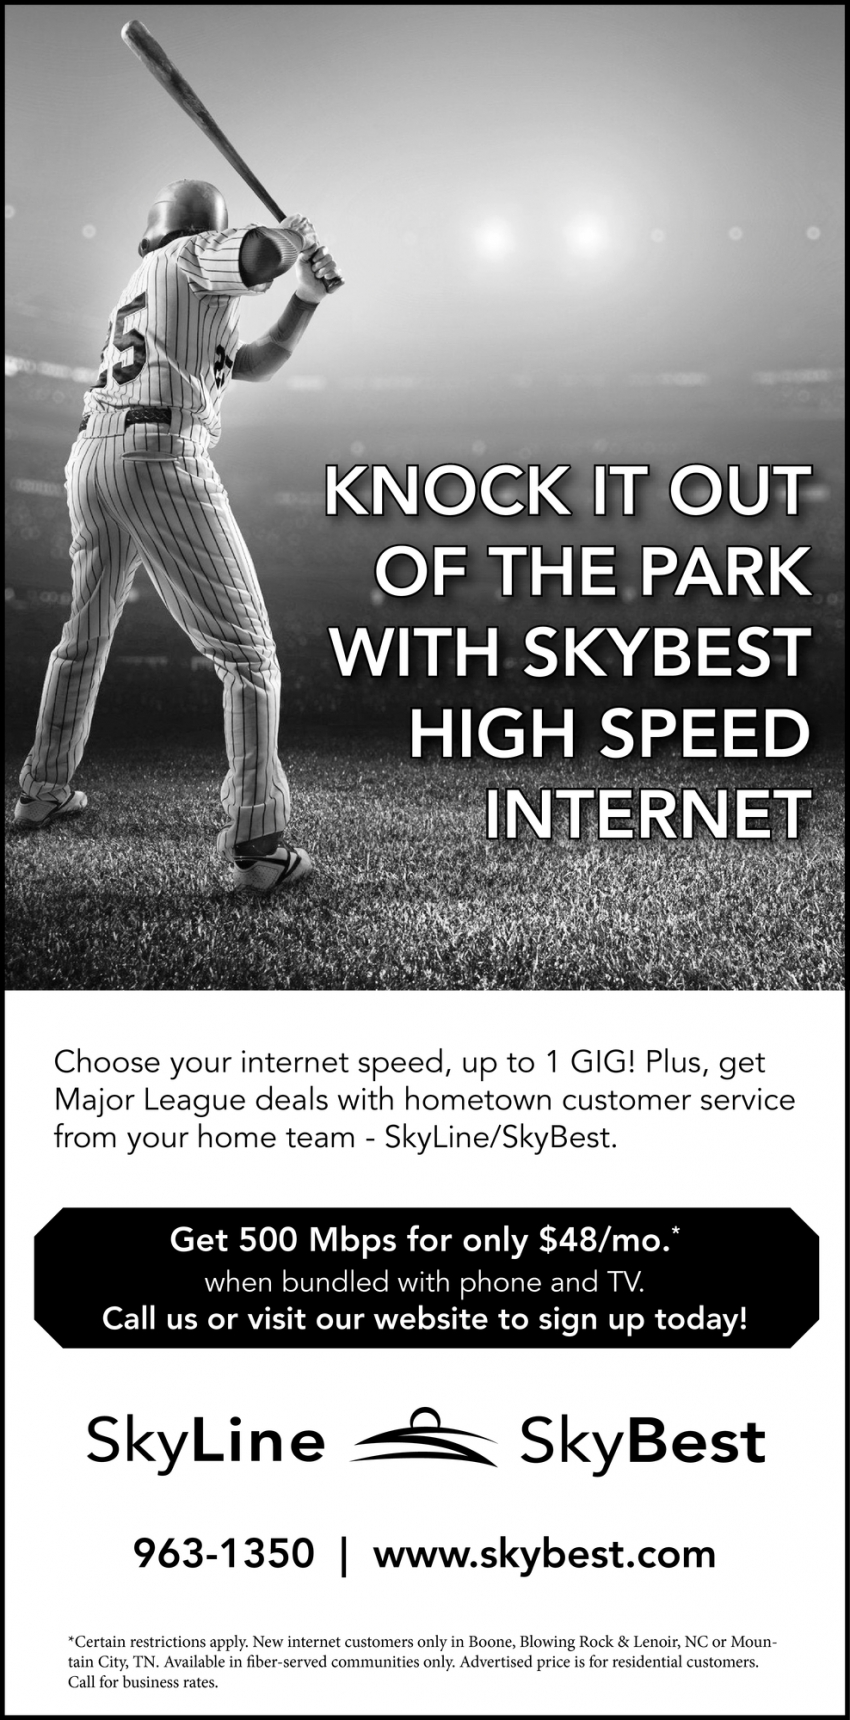 Knock It Out Of The Park With Skybest High Speed Internet